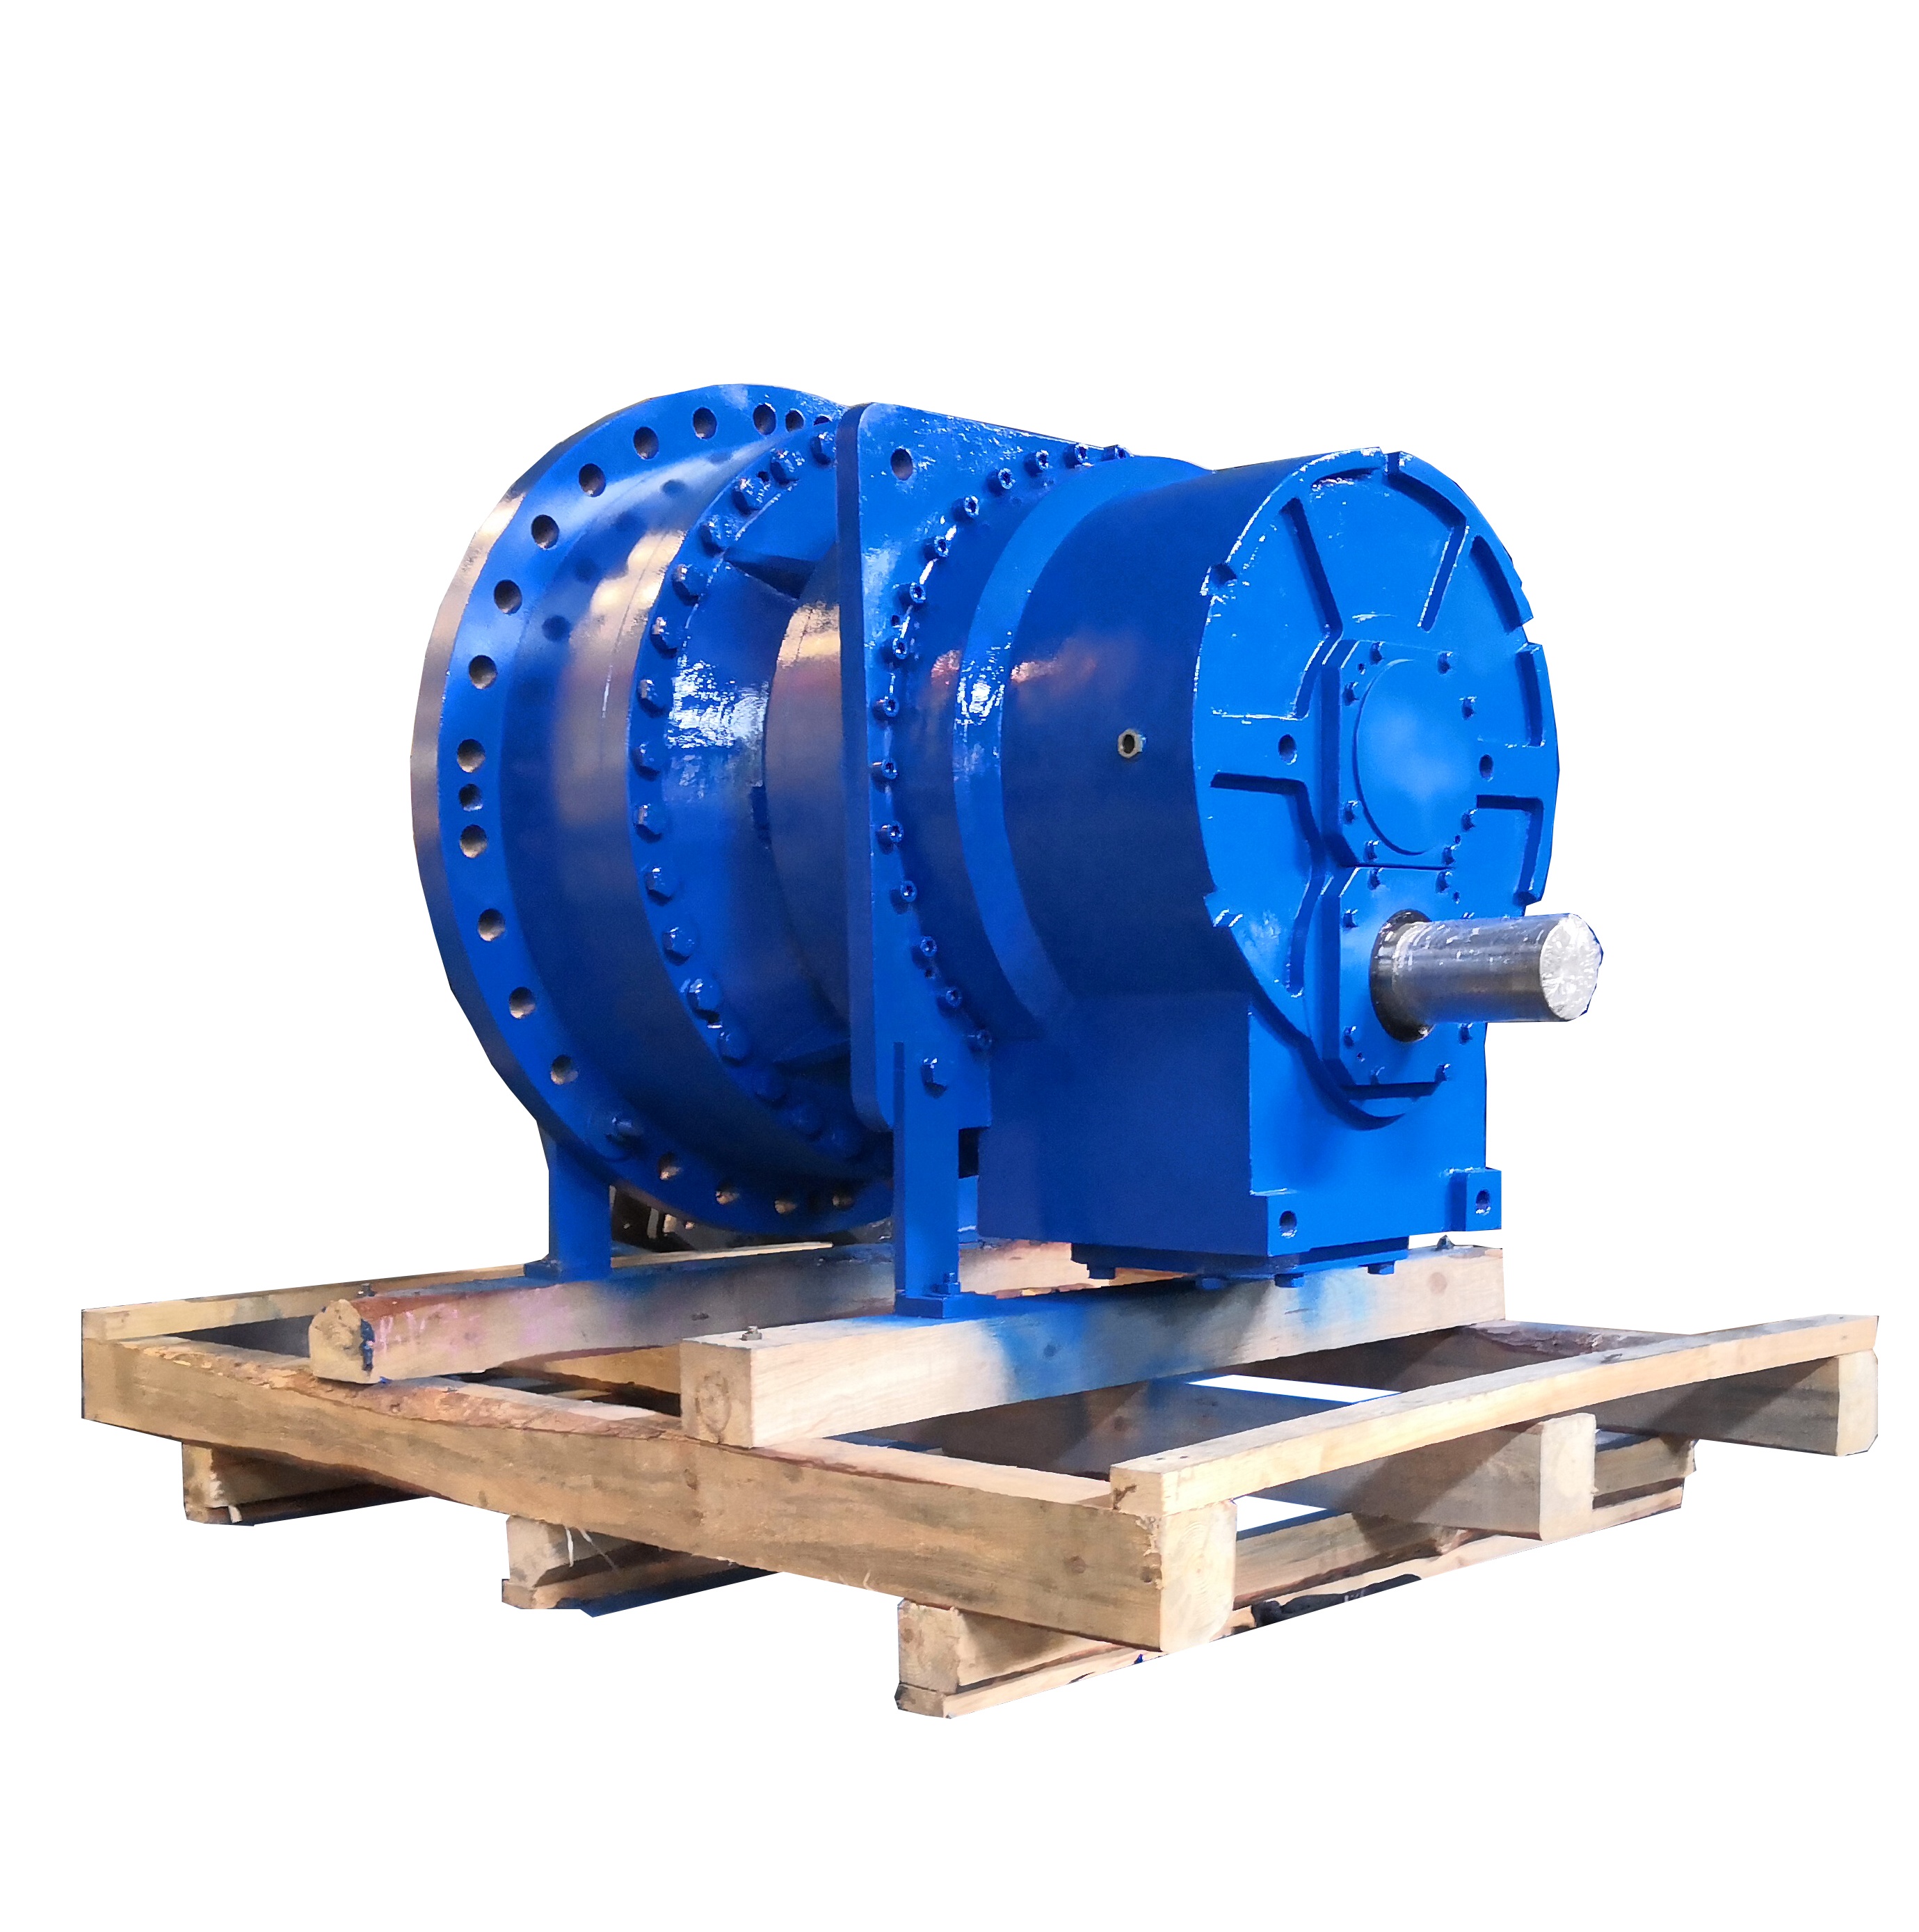 EVERGEAR Brevini-like Planetary gearbox speed Reducer for material processing